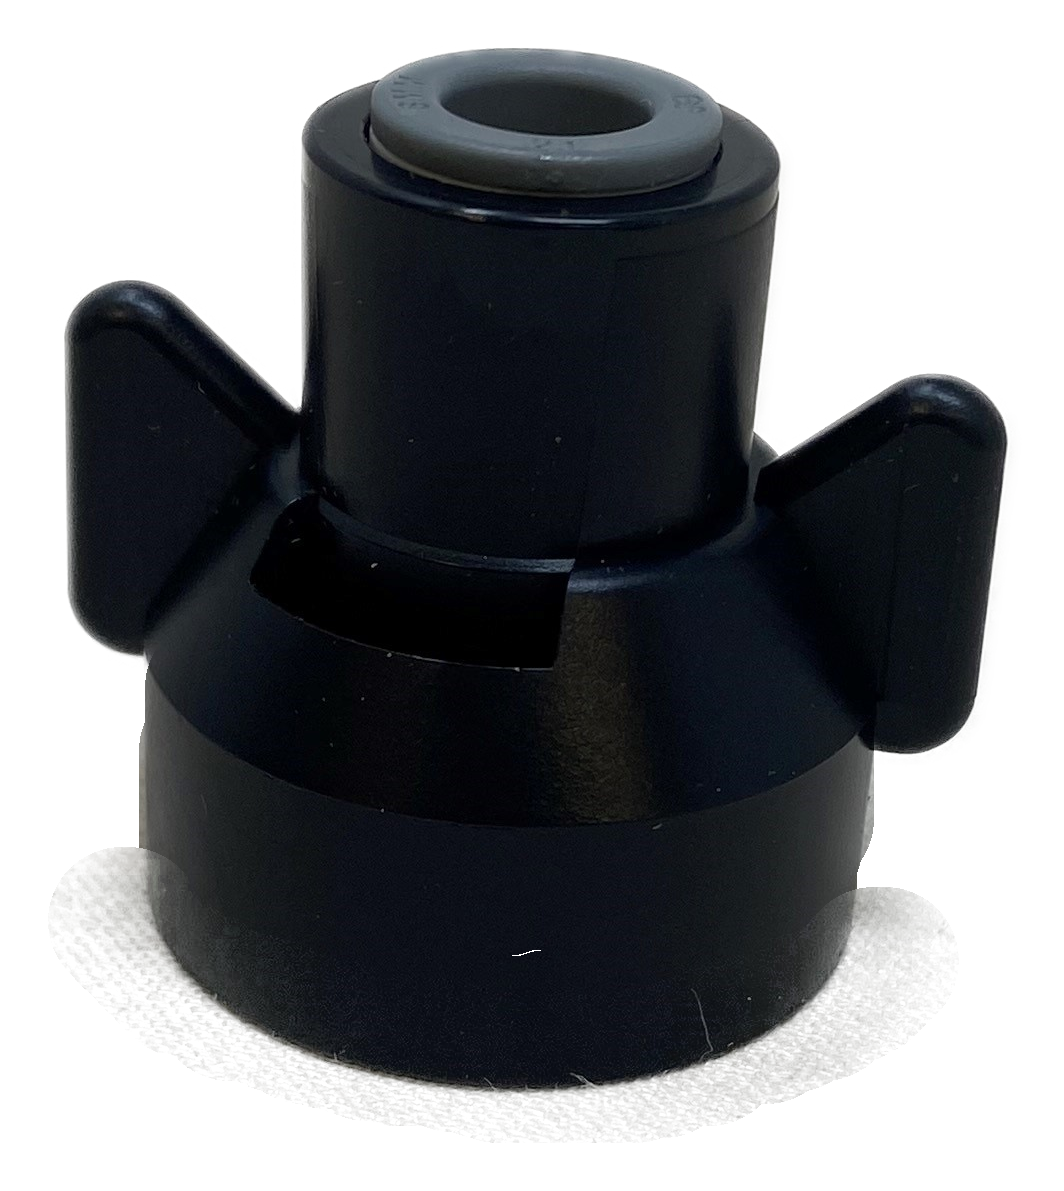 5/16" PTC Quick Connect Nozzle Cap with Seal